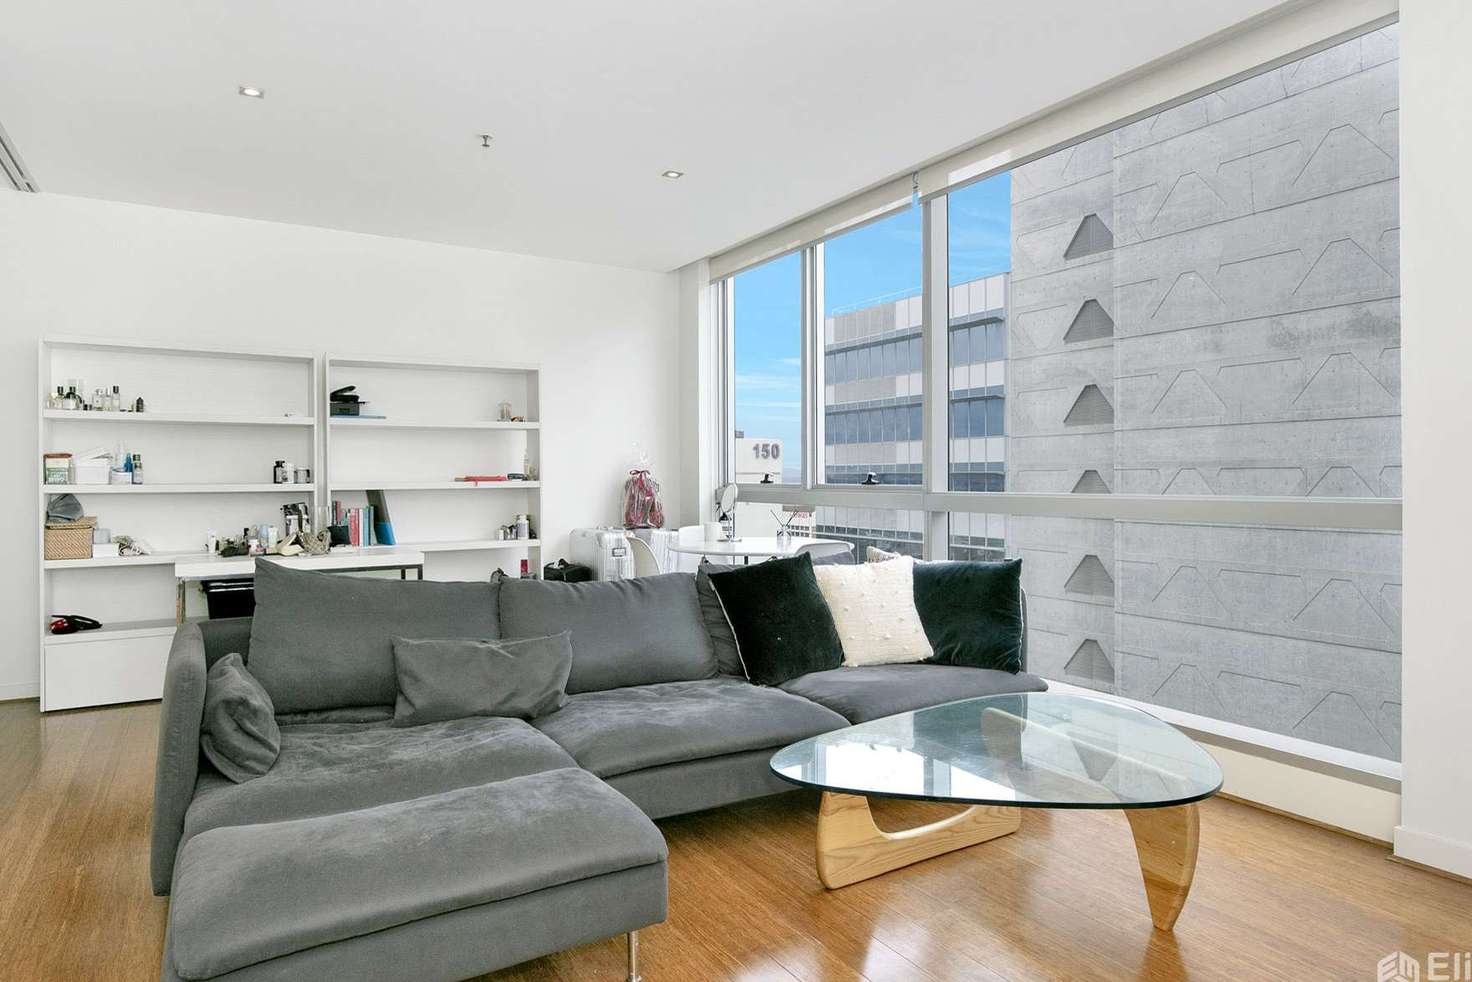 Main view of Homely apartment listing, 3412/22-24 JANE BELL LANE, Melbourne VIC 3000